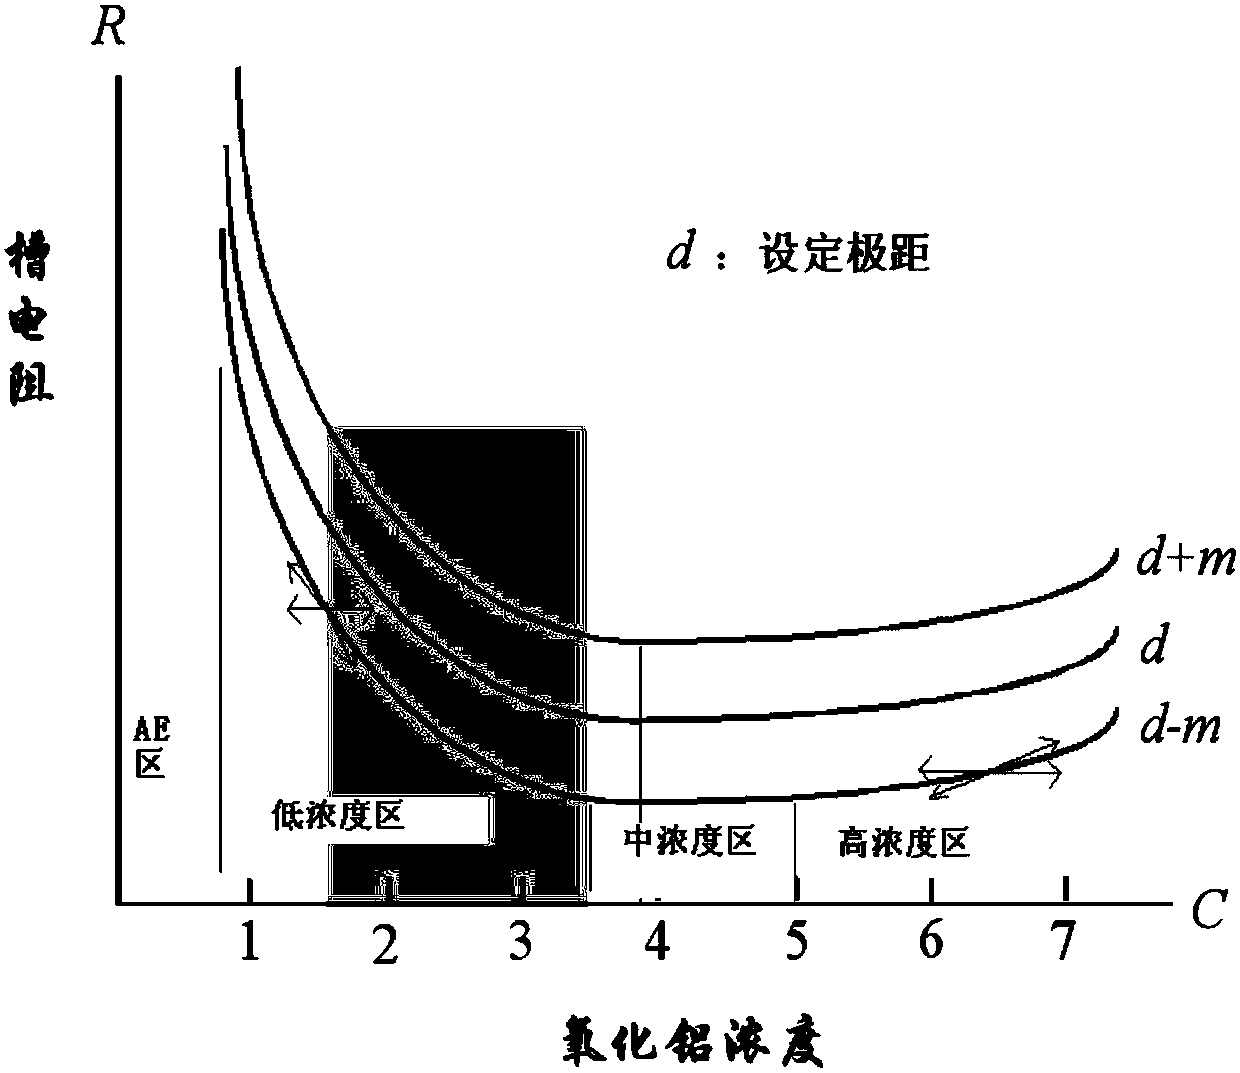 Normal cell voltage data time frequency analysis method and device used for aluminum electrolysis cell process control